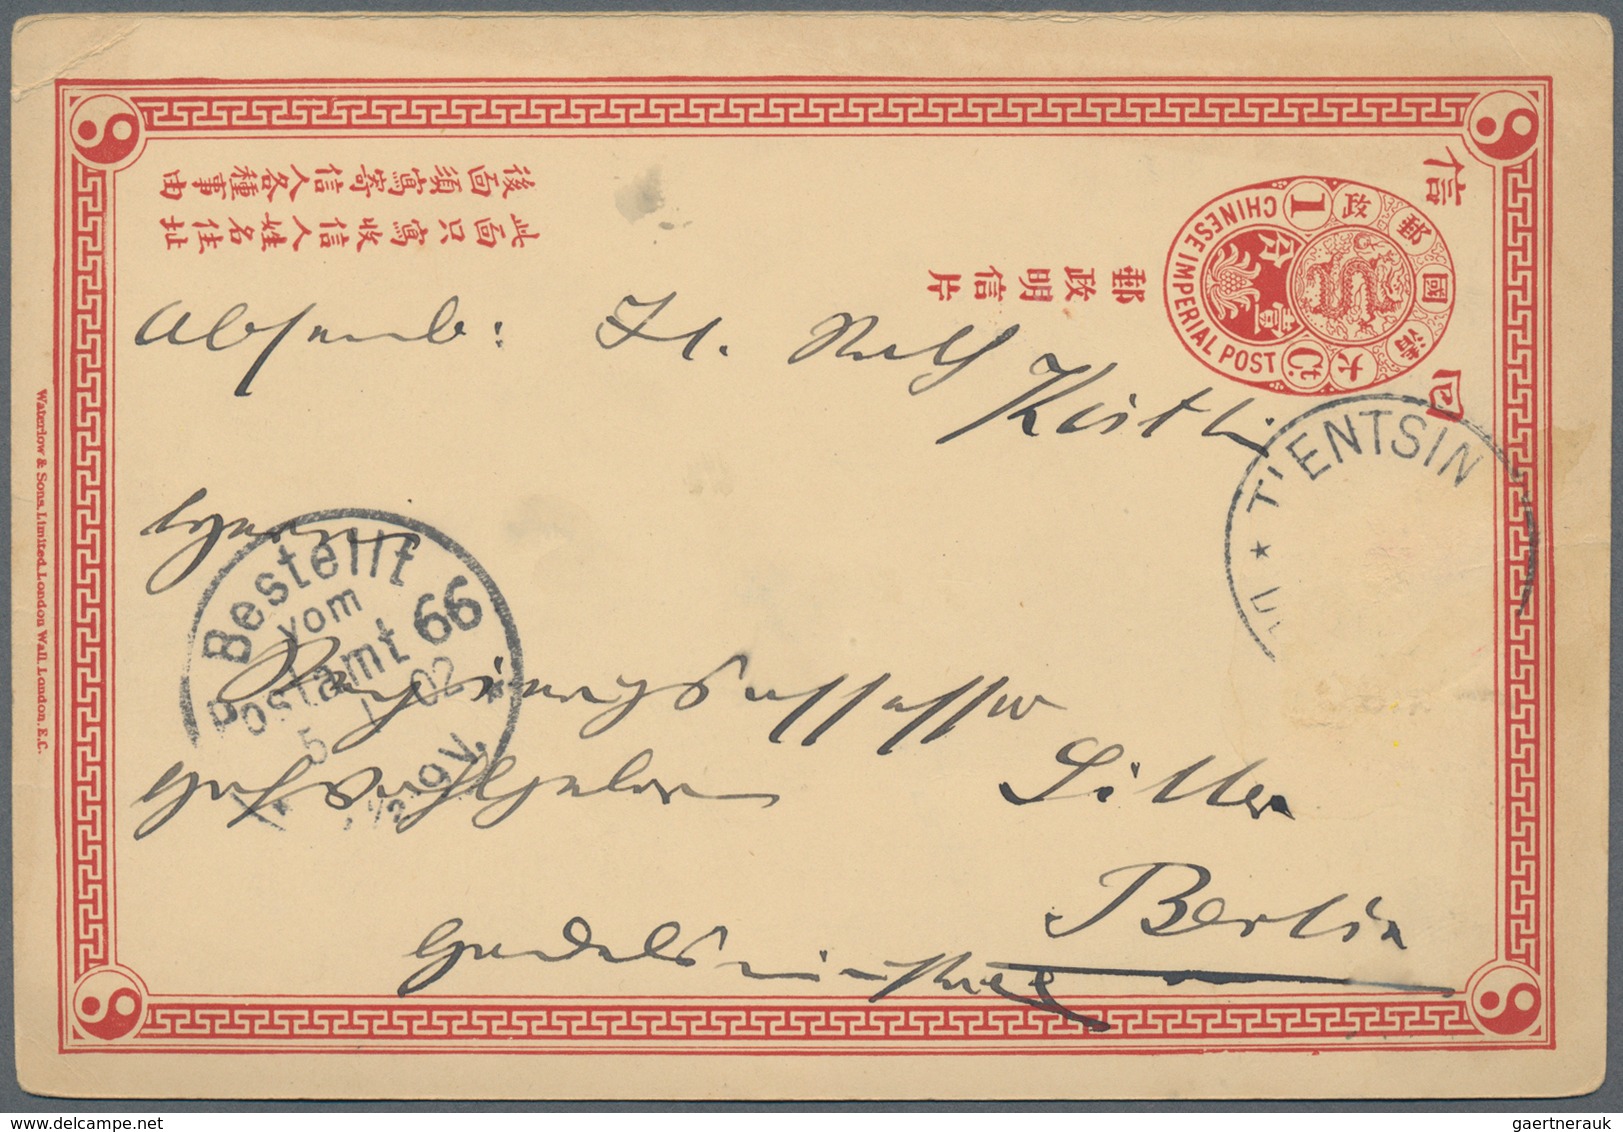 China - Ganzsachen: 1897/1908, cards ICP (1), CIP (4, inc. three reply, two used as german field pos